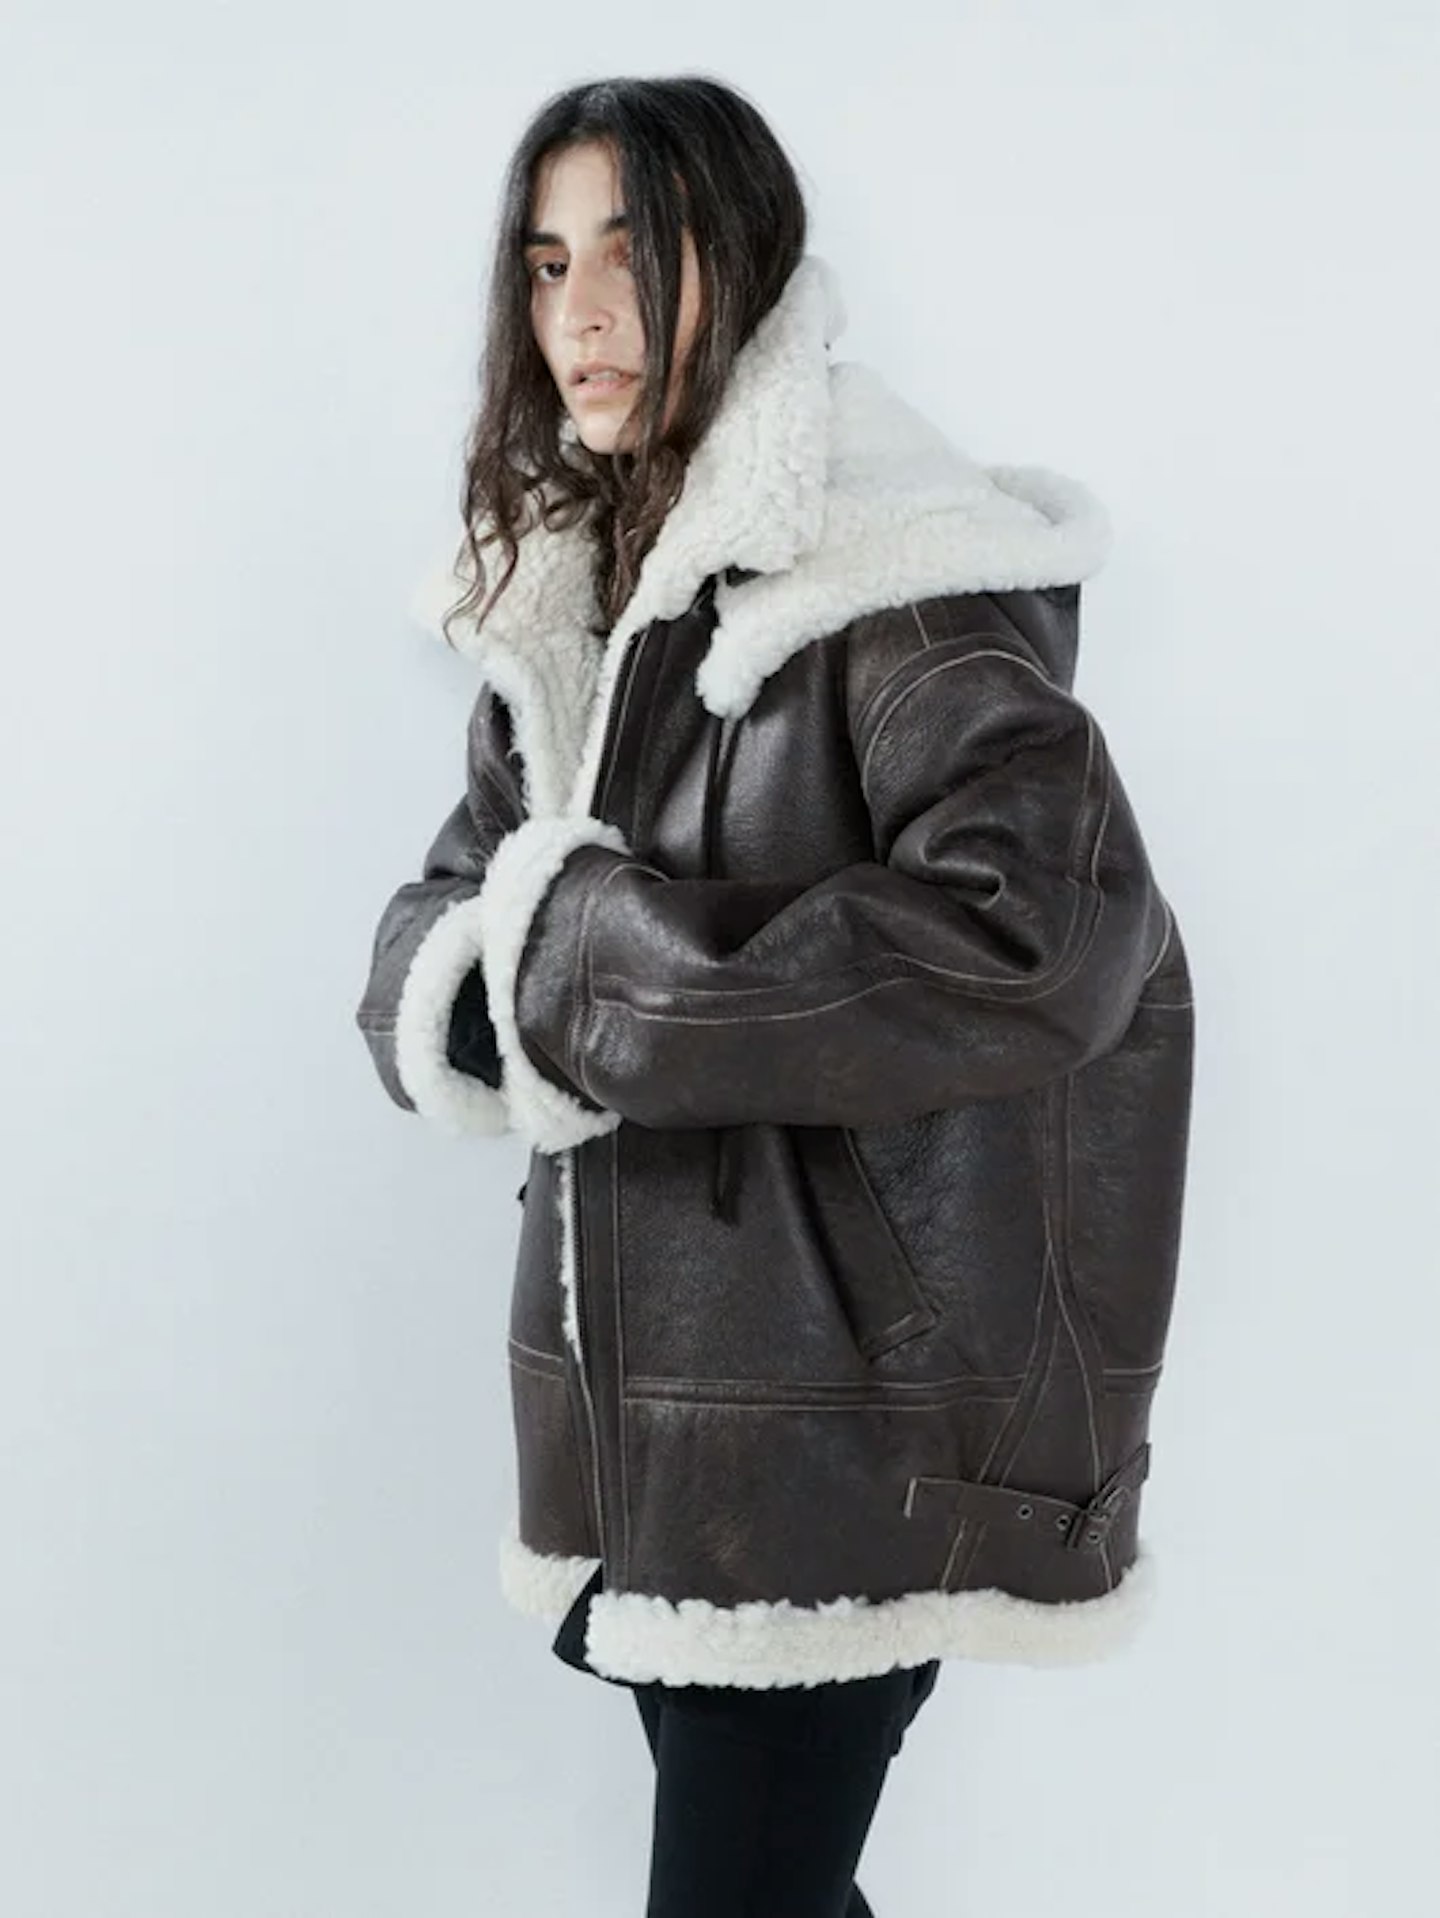 The Best Companion to Denim Next Fall? Shearling Coats – Sourcing